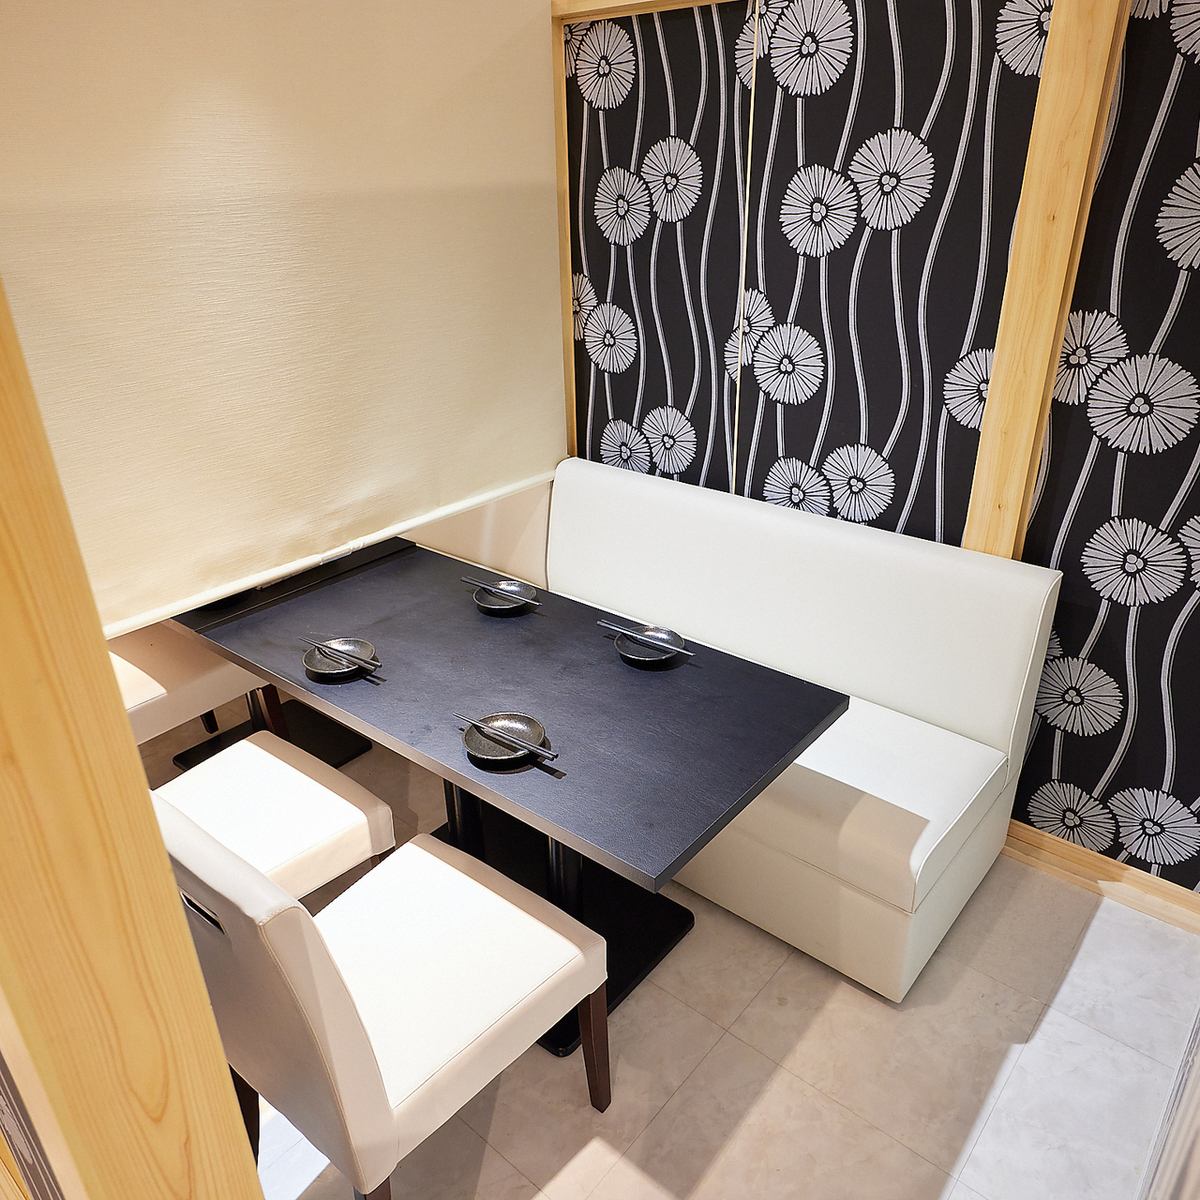 All rooms are equipped with private rooms! 2 seats ~ table seats, sofa seats, couple seats, etc.